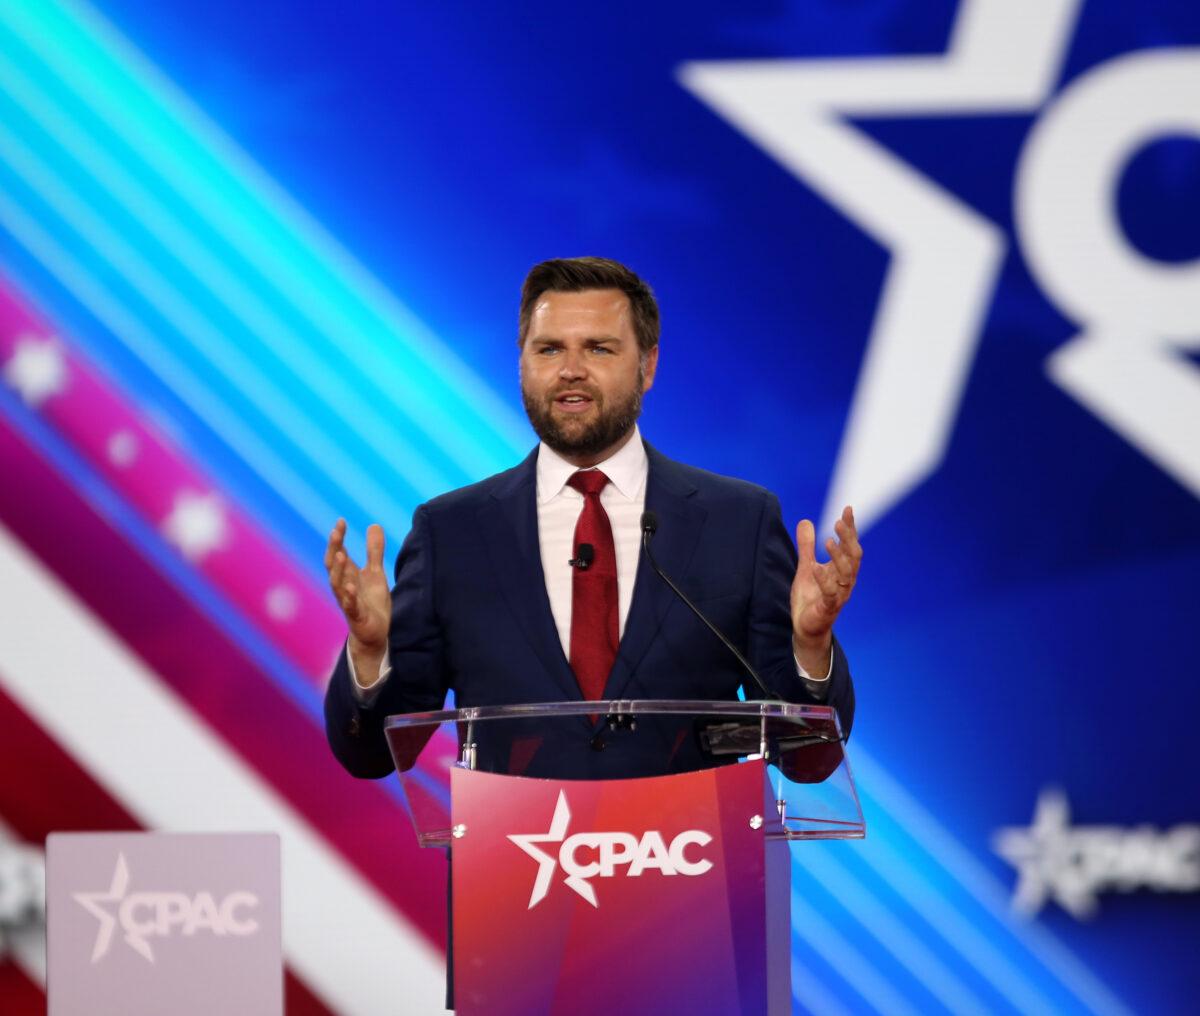 J.D. Vance, Ohio Republican Senate candidate, speaks at the Conservative Political Action Conference in Dallas, Texas, at the Hilton Anatole on Aug. 5, 2022. (Bobby Sanchez/The Epoch Times)